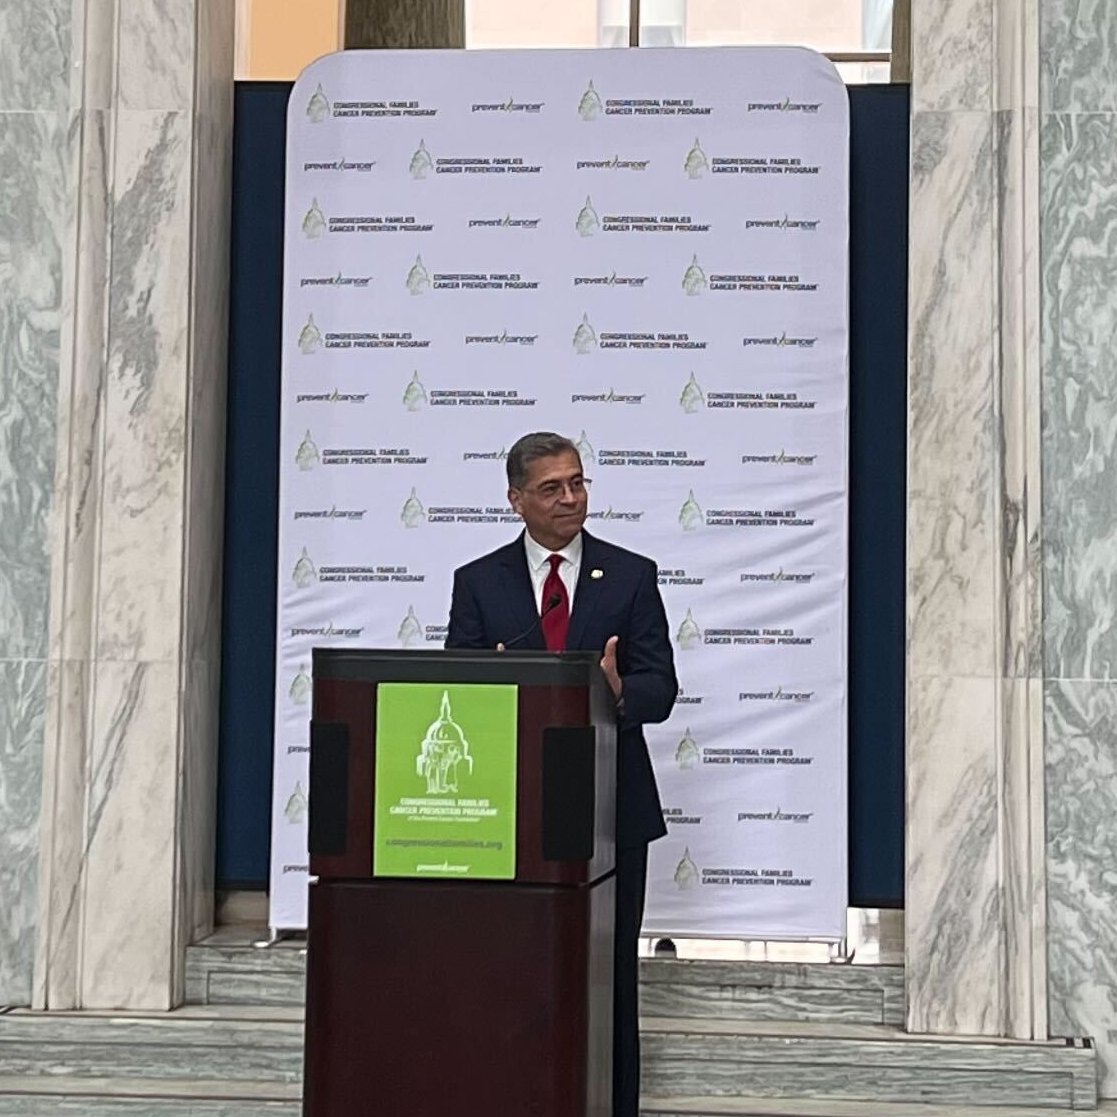 We're proud to sponsor the #CongressionalFamilies Cancer Prevention Program and @preventcancer reception honoring Dr. Collins! Great to see HHS @SecBecerra and @rosadelauro speak passionately about cancer screening ⁦innovation and patient access.